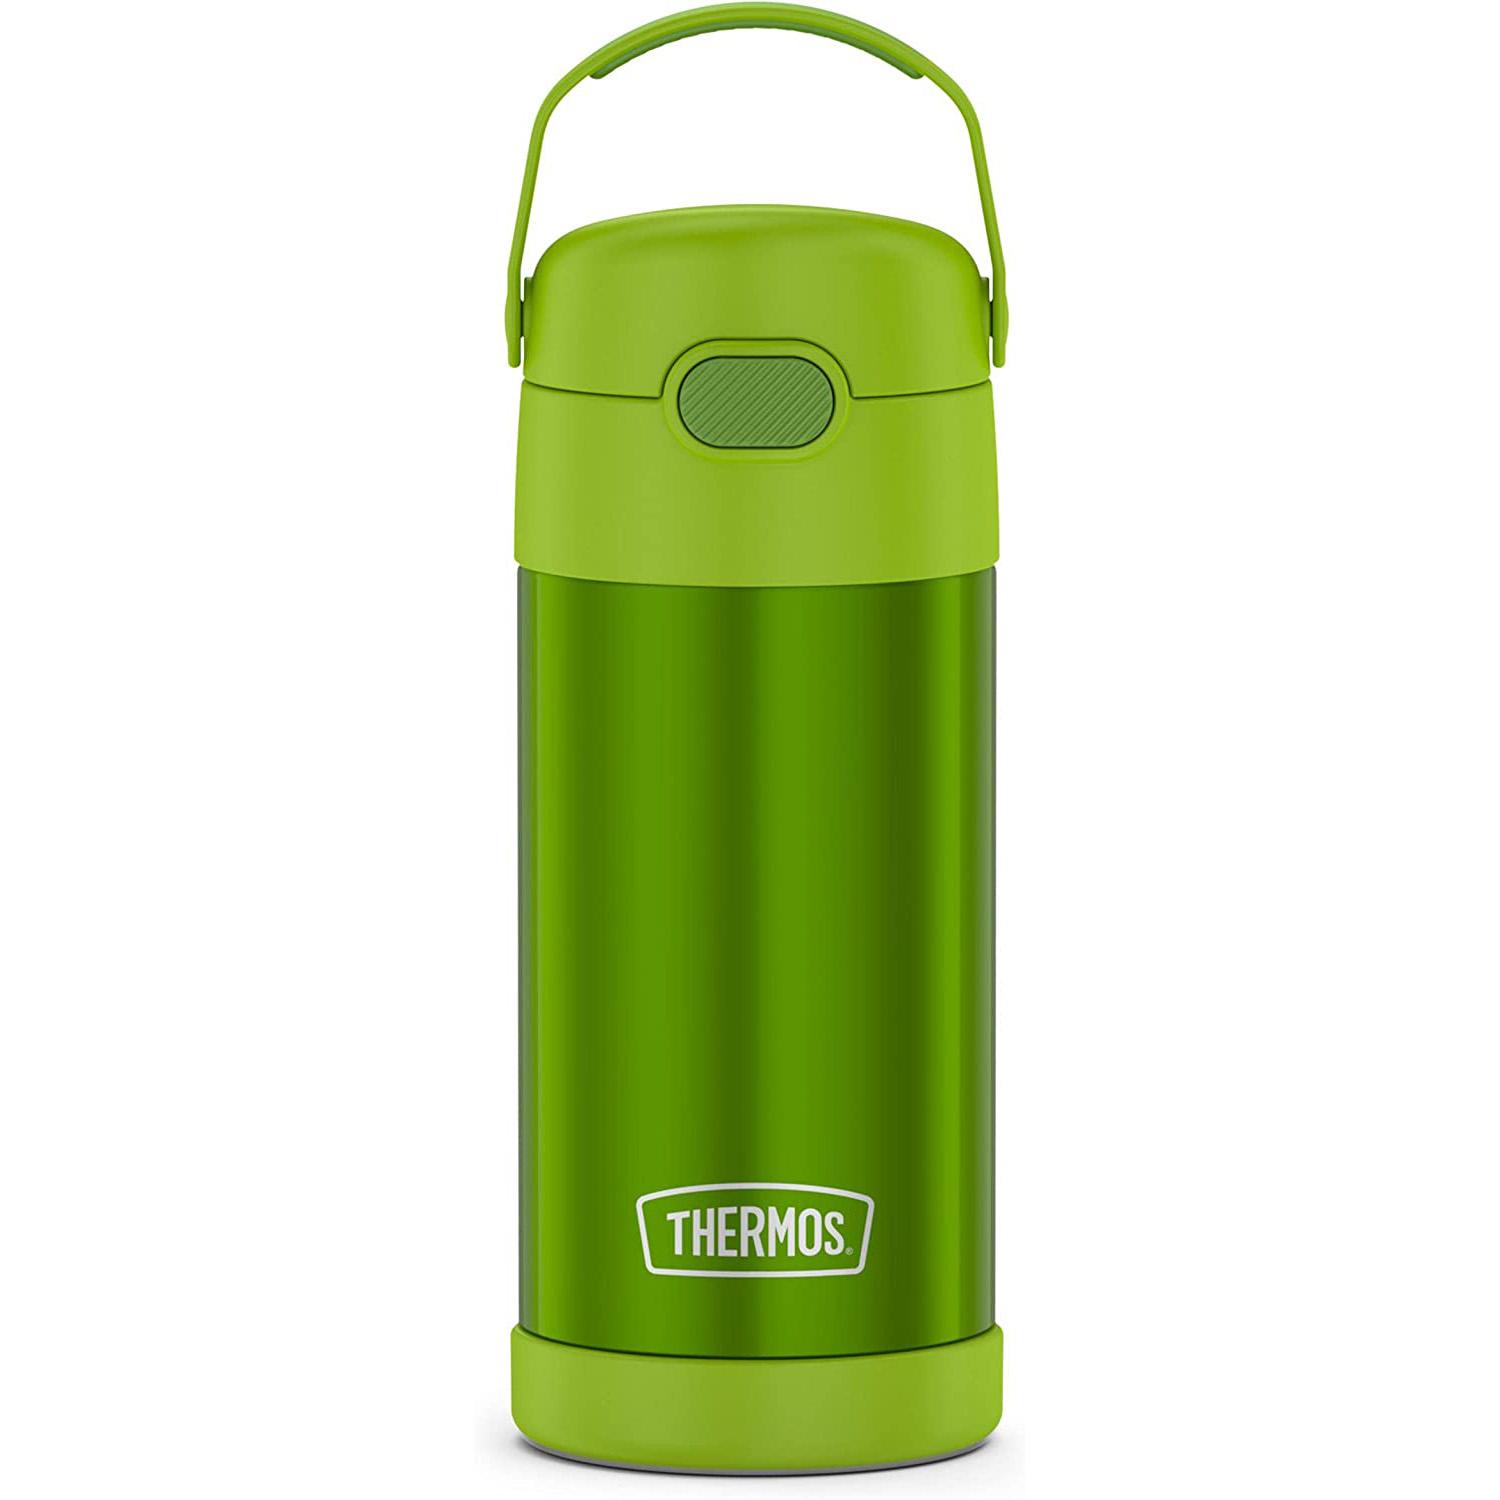 Thermos Funtainer 12oz Stainless Steel Vacuum Bottle for $11.84